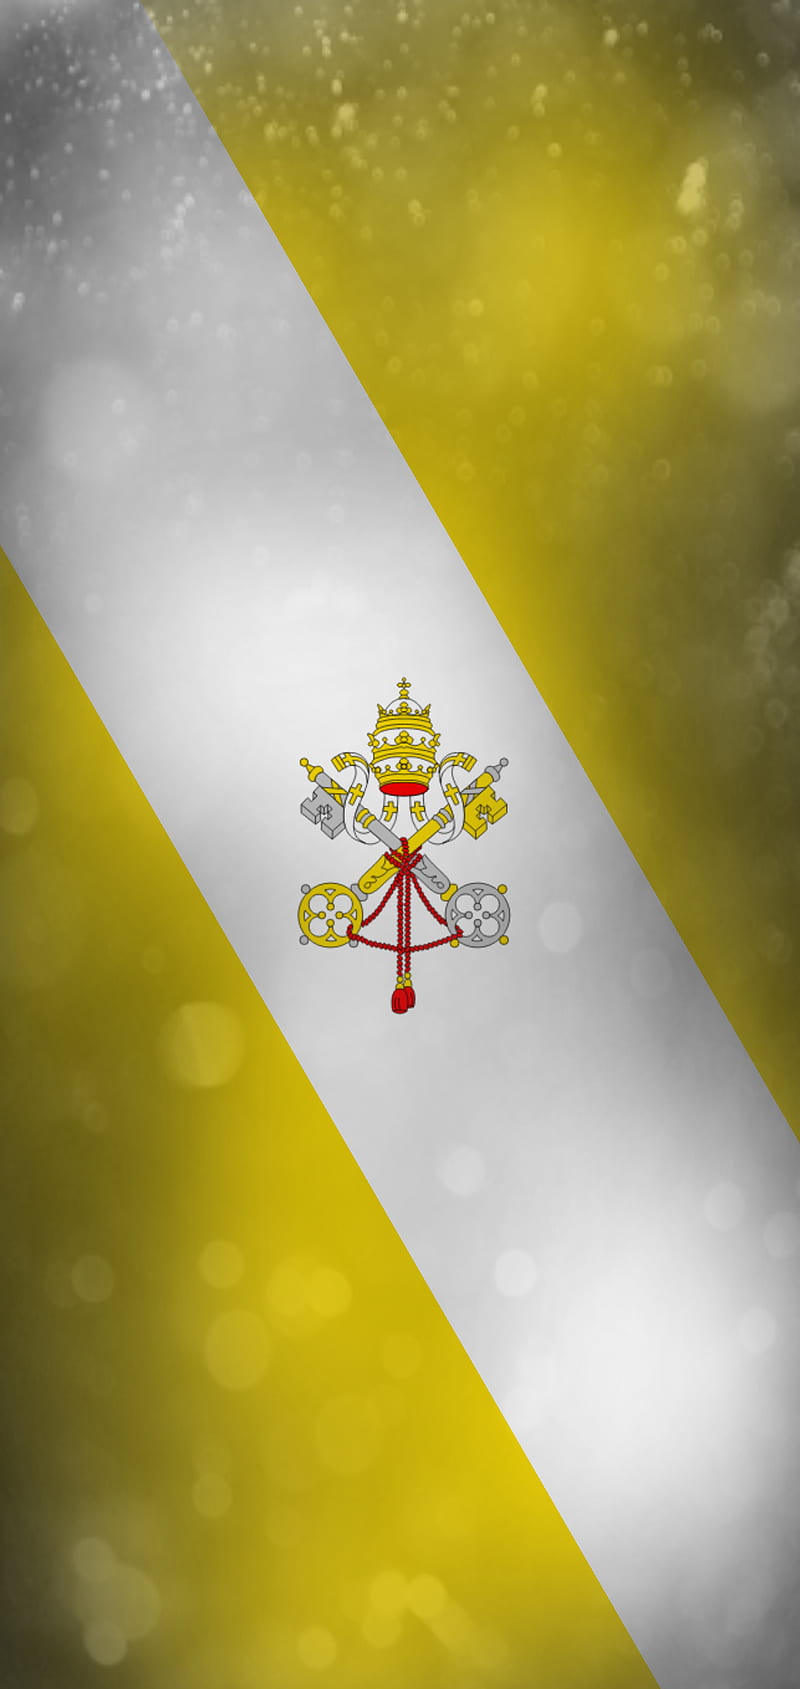 Vatican City Images | Free Photos, PNG Stickers, Wallpapers & Backgrounds -  rawpixel